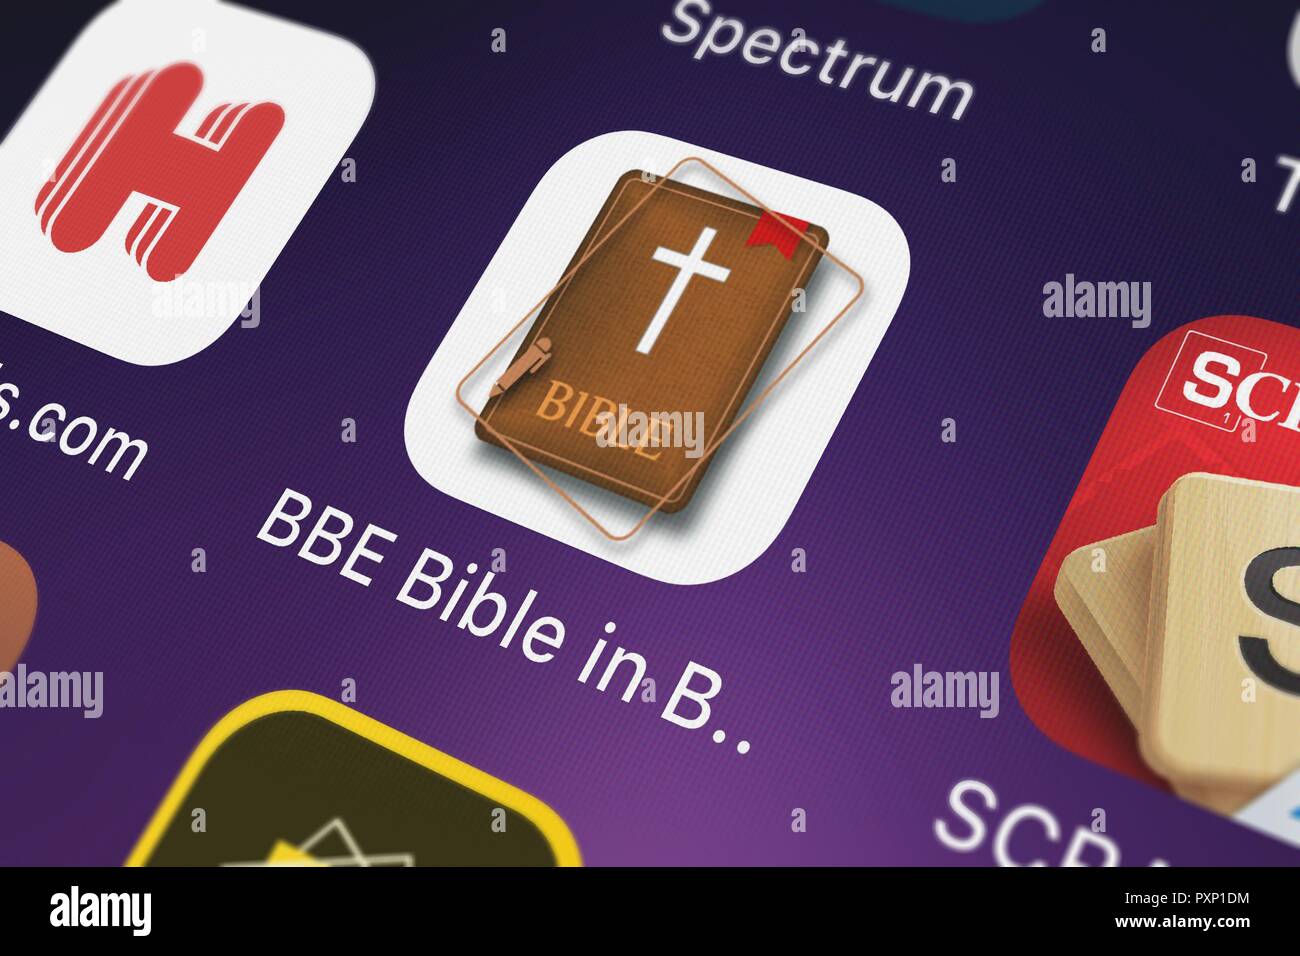 London, United Kingdom - October 23, 2018: Icon of the mobile app BBE Bible in Basic English. Easy to Read Version from Oleg Shukalovich on an iPhone. Stock Photo